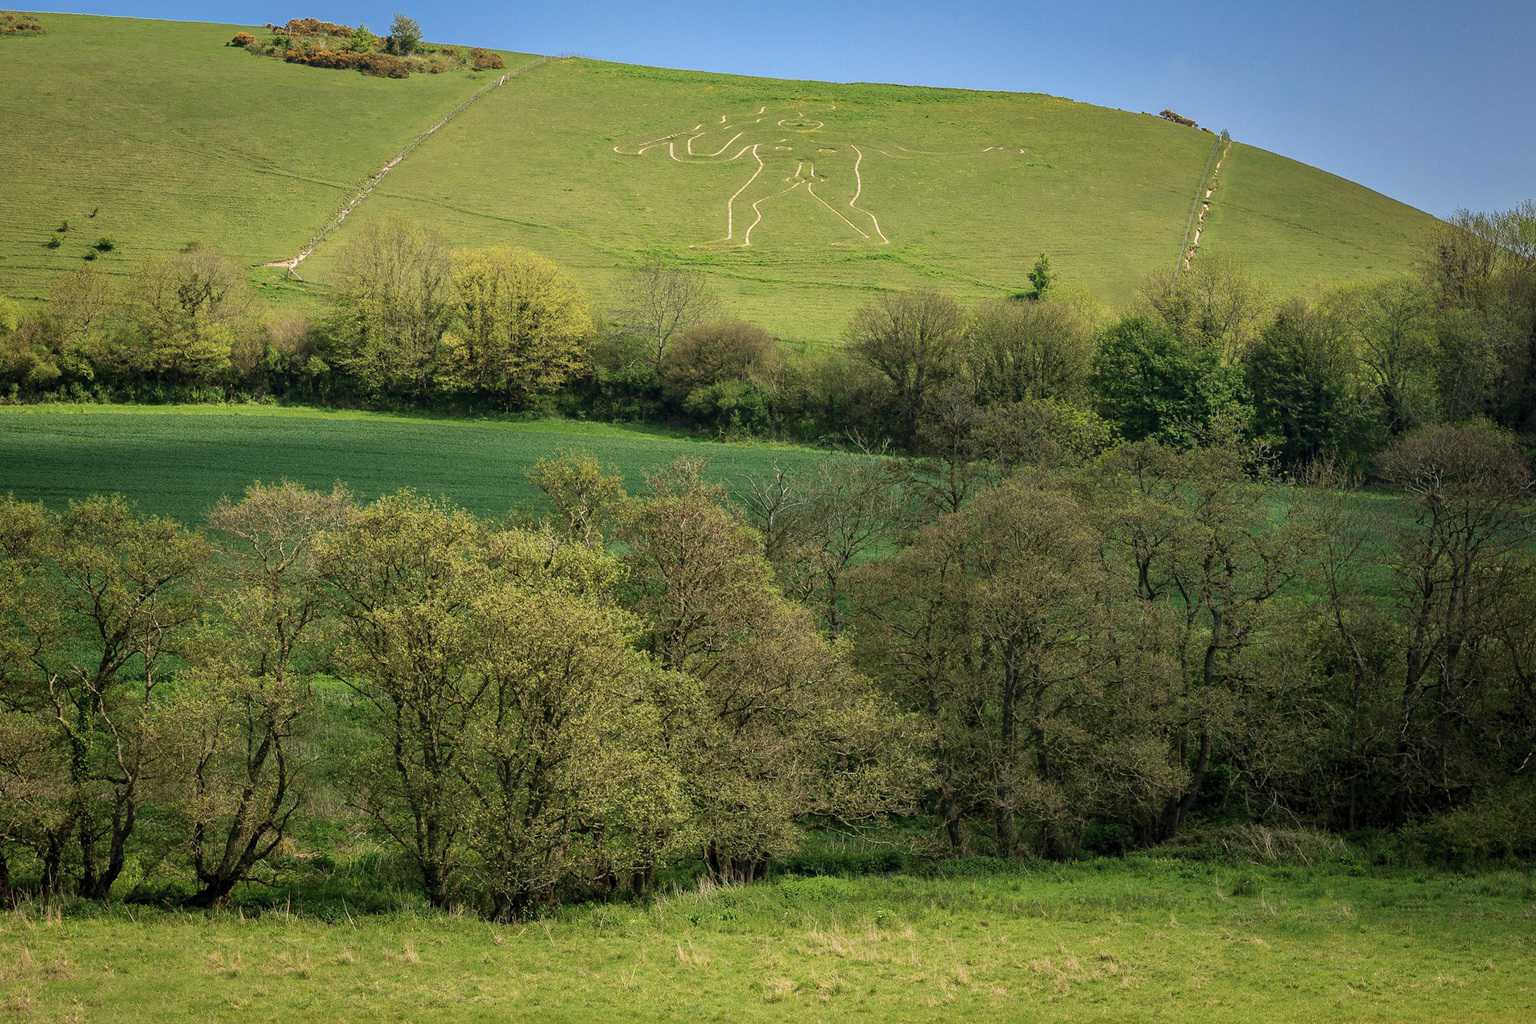  Picture of the Cerne Giant by Rick McEvoy Dorset Photographer 